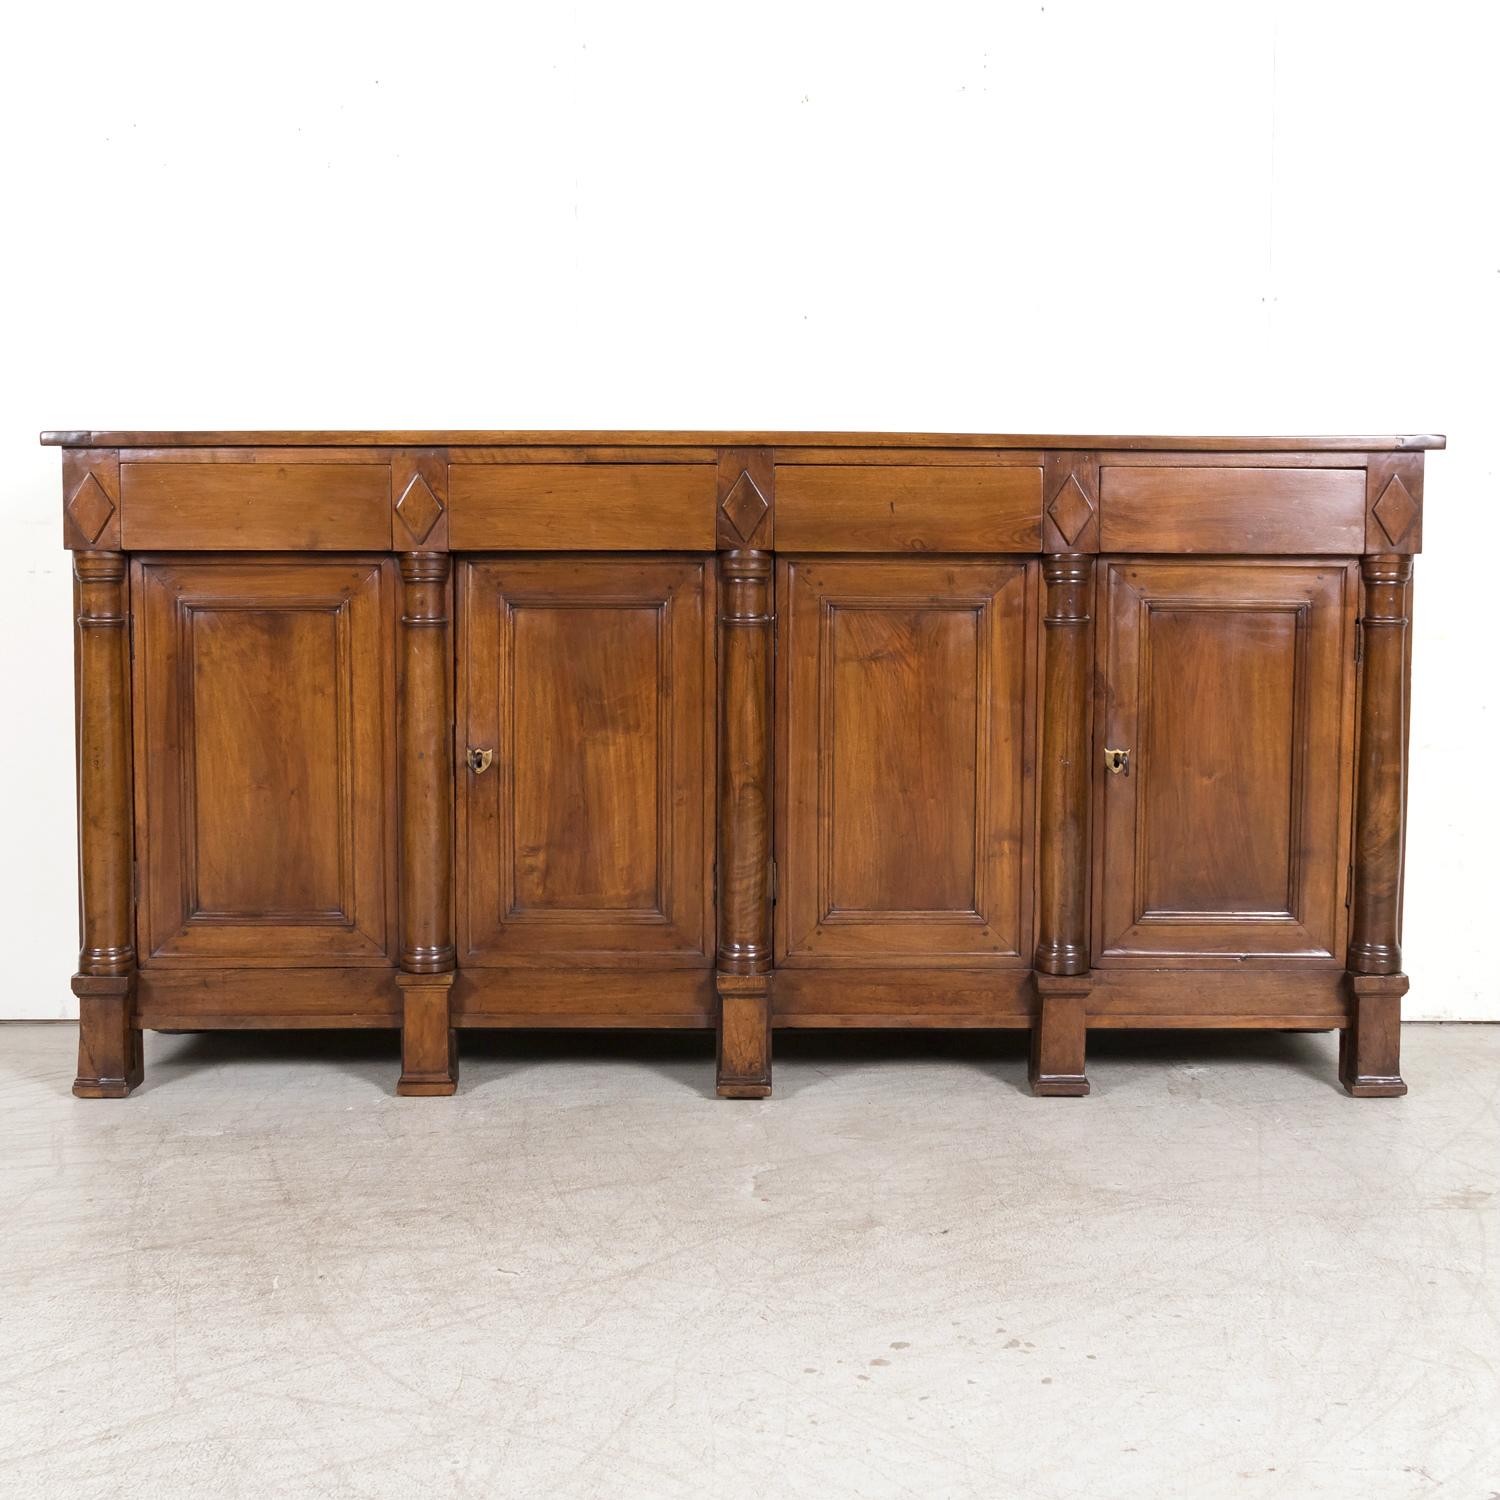 A stunning 18th century French Empire period enfilade buffet, circa early 1800s, handcrafted of solid walnut by talented artisans in Lyon, the culinary capital of France, renowned for its furniture production during the 18th century. Its style is